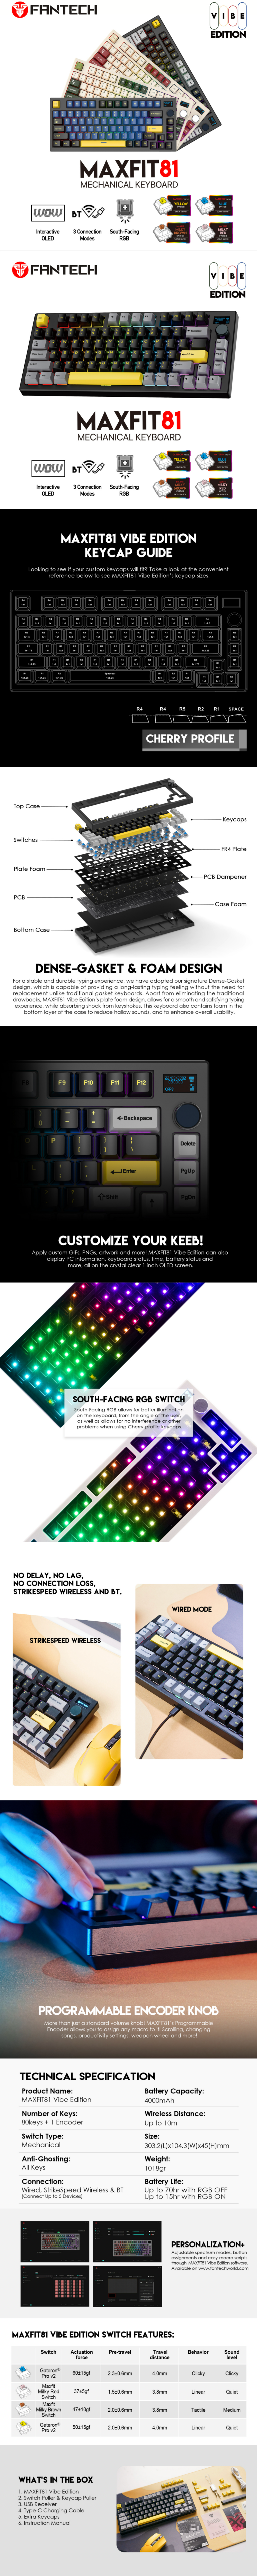 A large marketing image providing additional information about the product Fantech MAXFIT81 Wireless Hot-Swappable RGB Mechanical Bluetooth Keyboard (Grand Cobalt - Yellow Switch) - Additional alt info not provided